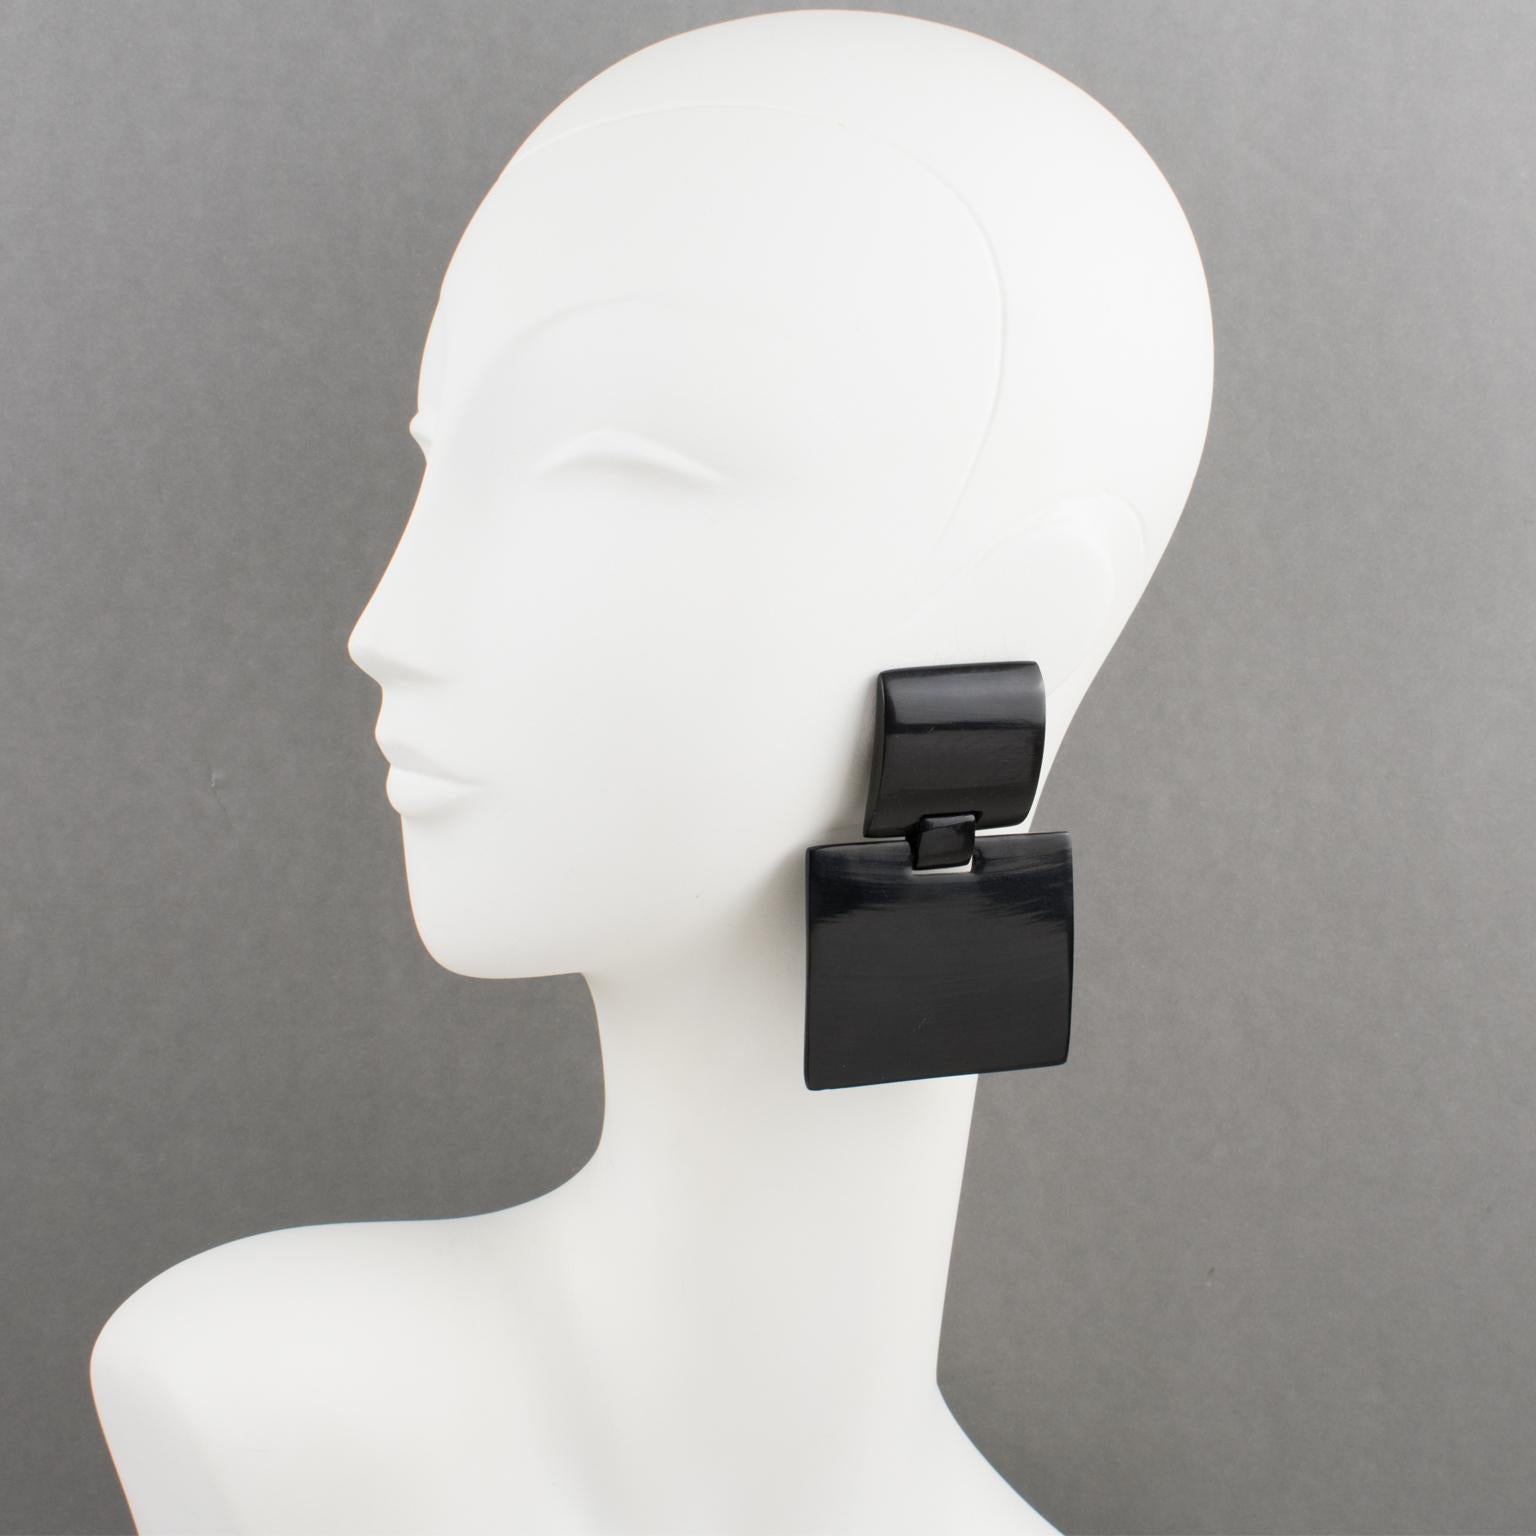 These gorgeous oversized clip-on earrings, designed by Gerda Lyngaard for Monies, feature a dangling geometric shape built with black Ebony wood. They have marked 